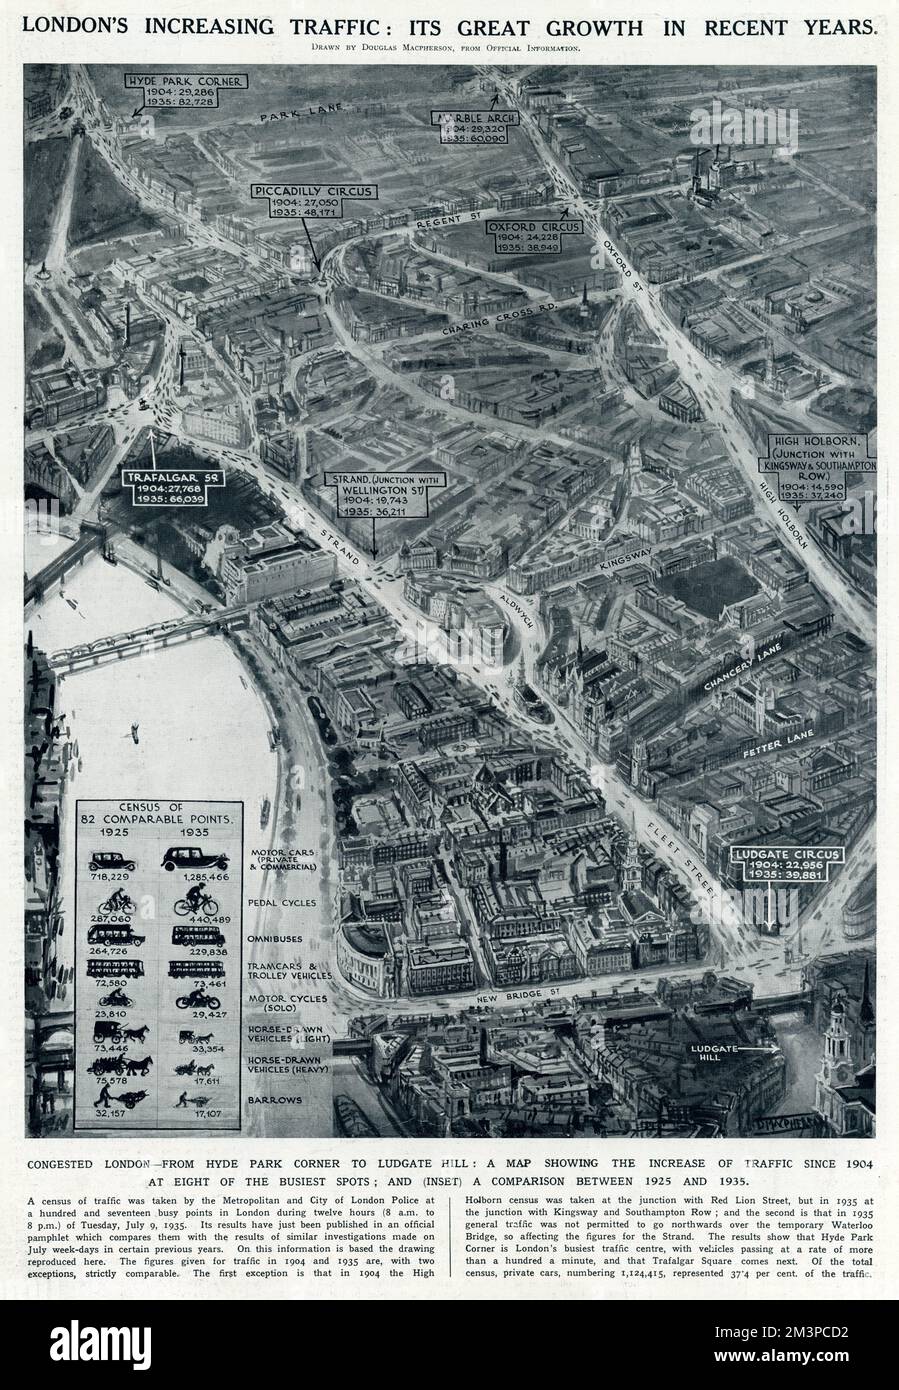 Congested London, from Hyde Park corner to Ludgate Hill, a map showing the increase of traffic since 1904 at eight of the busiest spots.     Date: 1936 Stock Photo